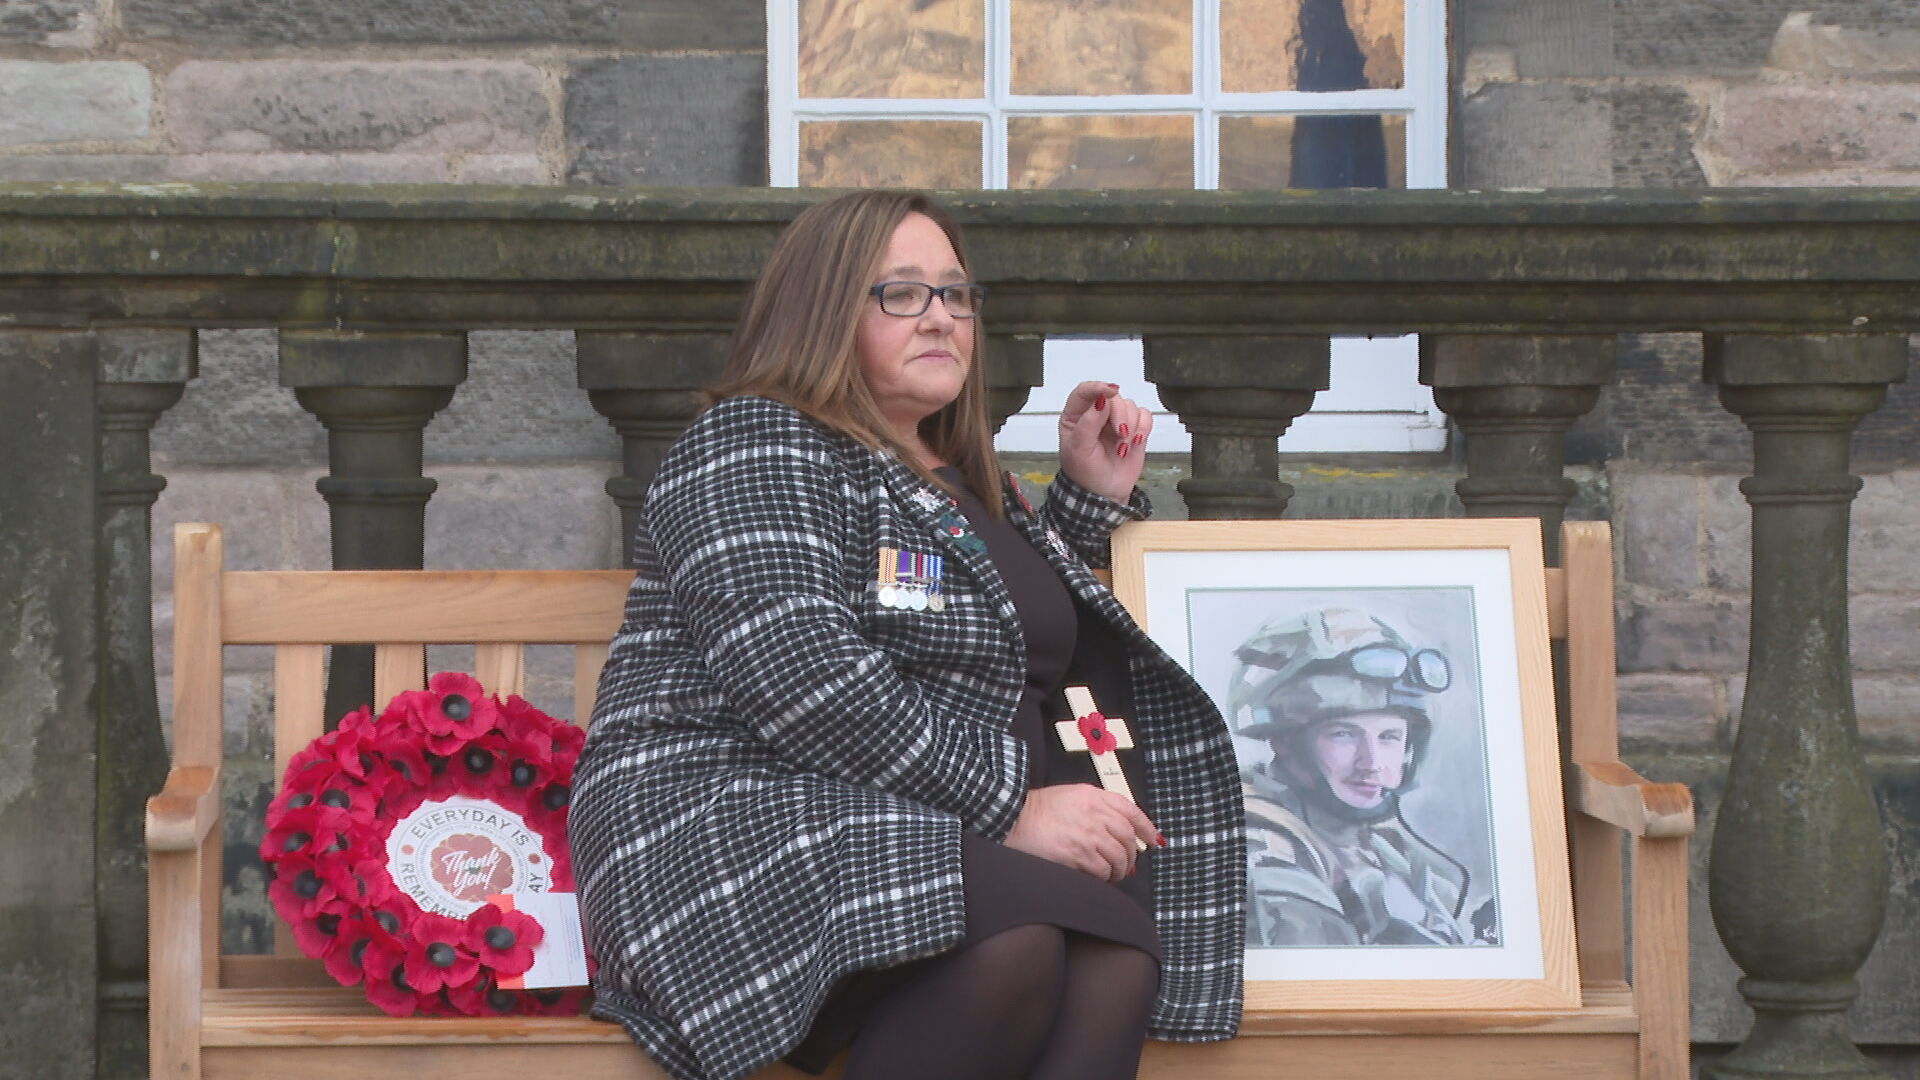 Janette Binnie sitting on the bench next to a painting of her son, Sergeant Sean Binnie, who died in Afghanistan.